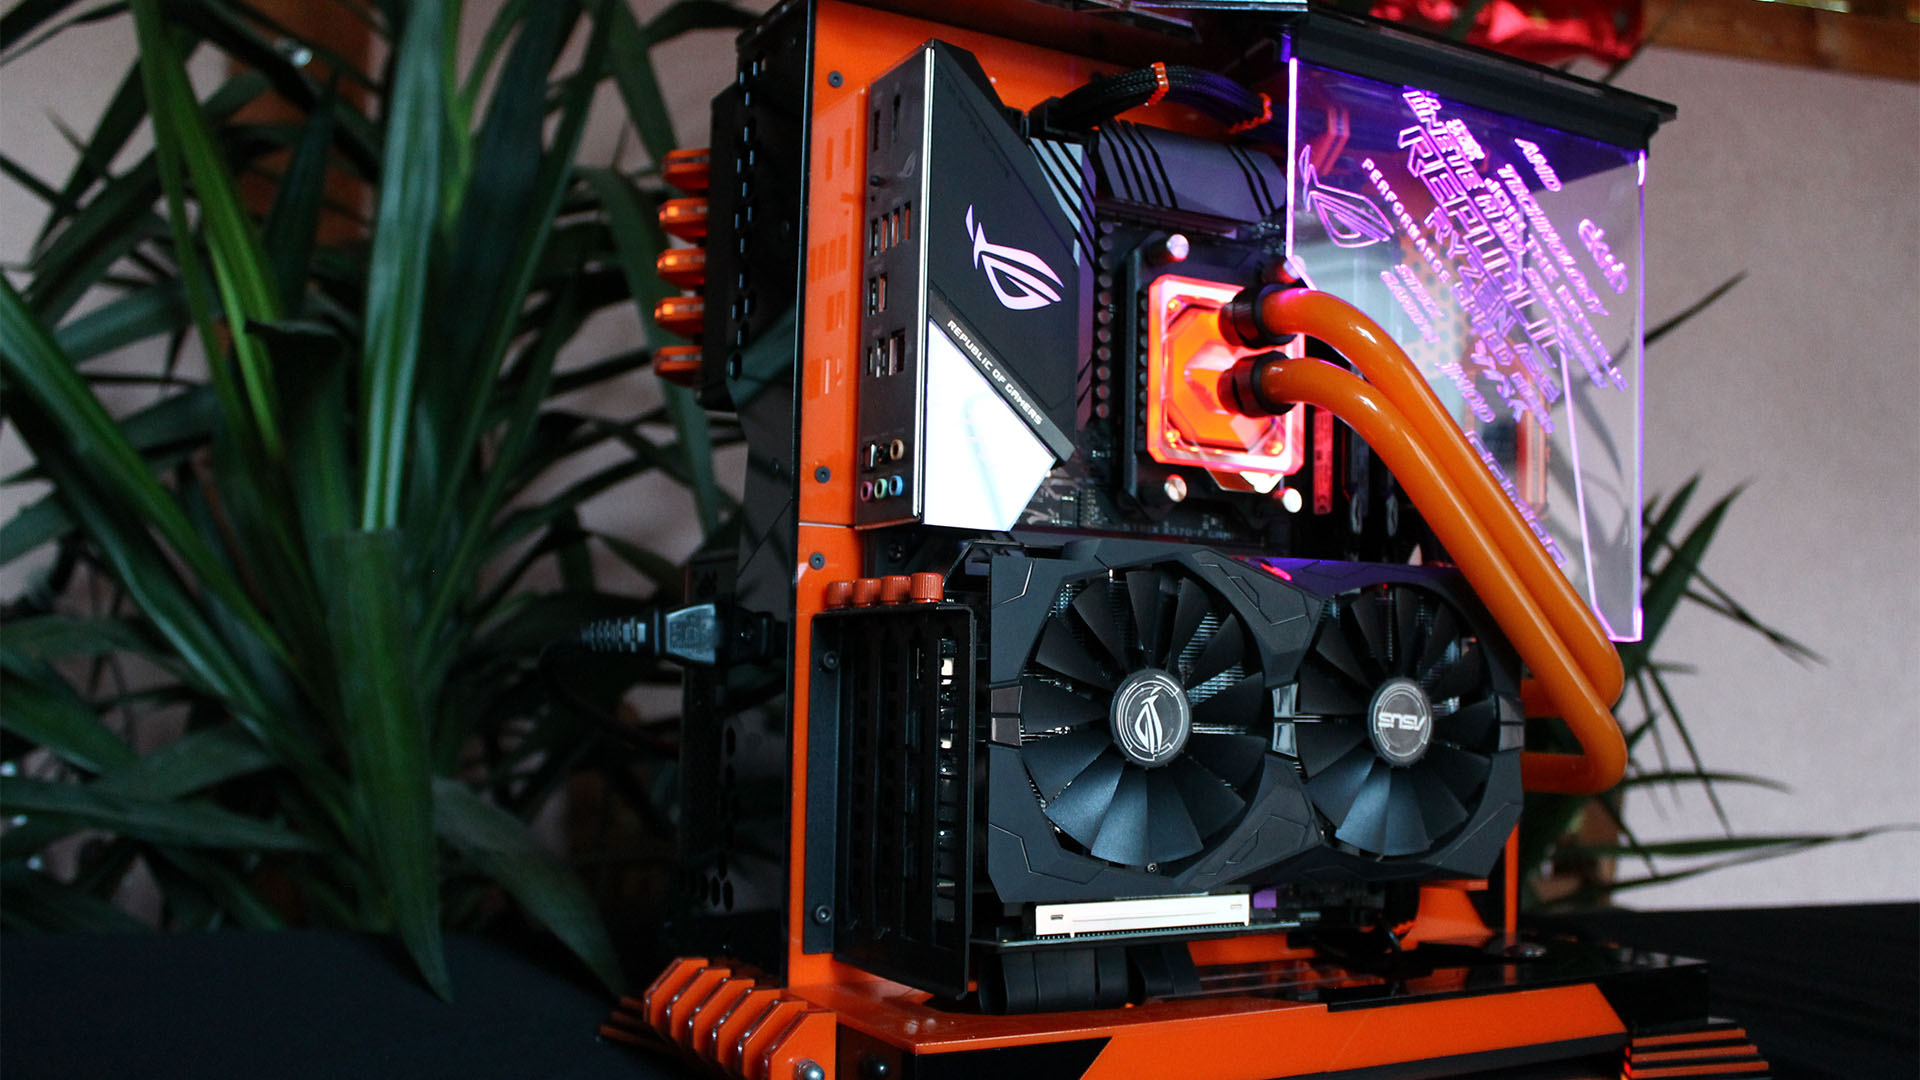 This handsome open-air Asus gaming PC build is inspired by the pagoda